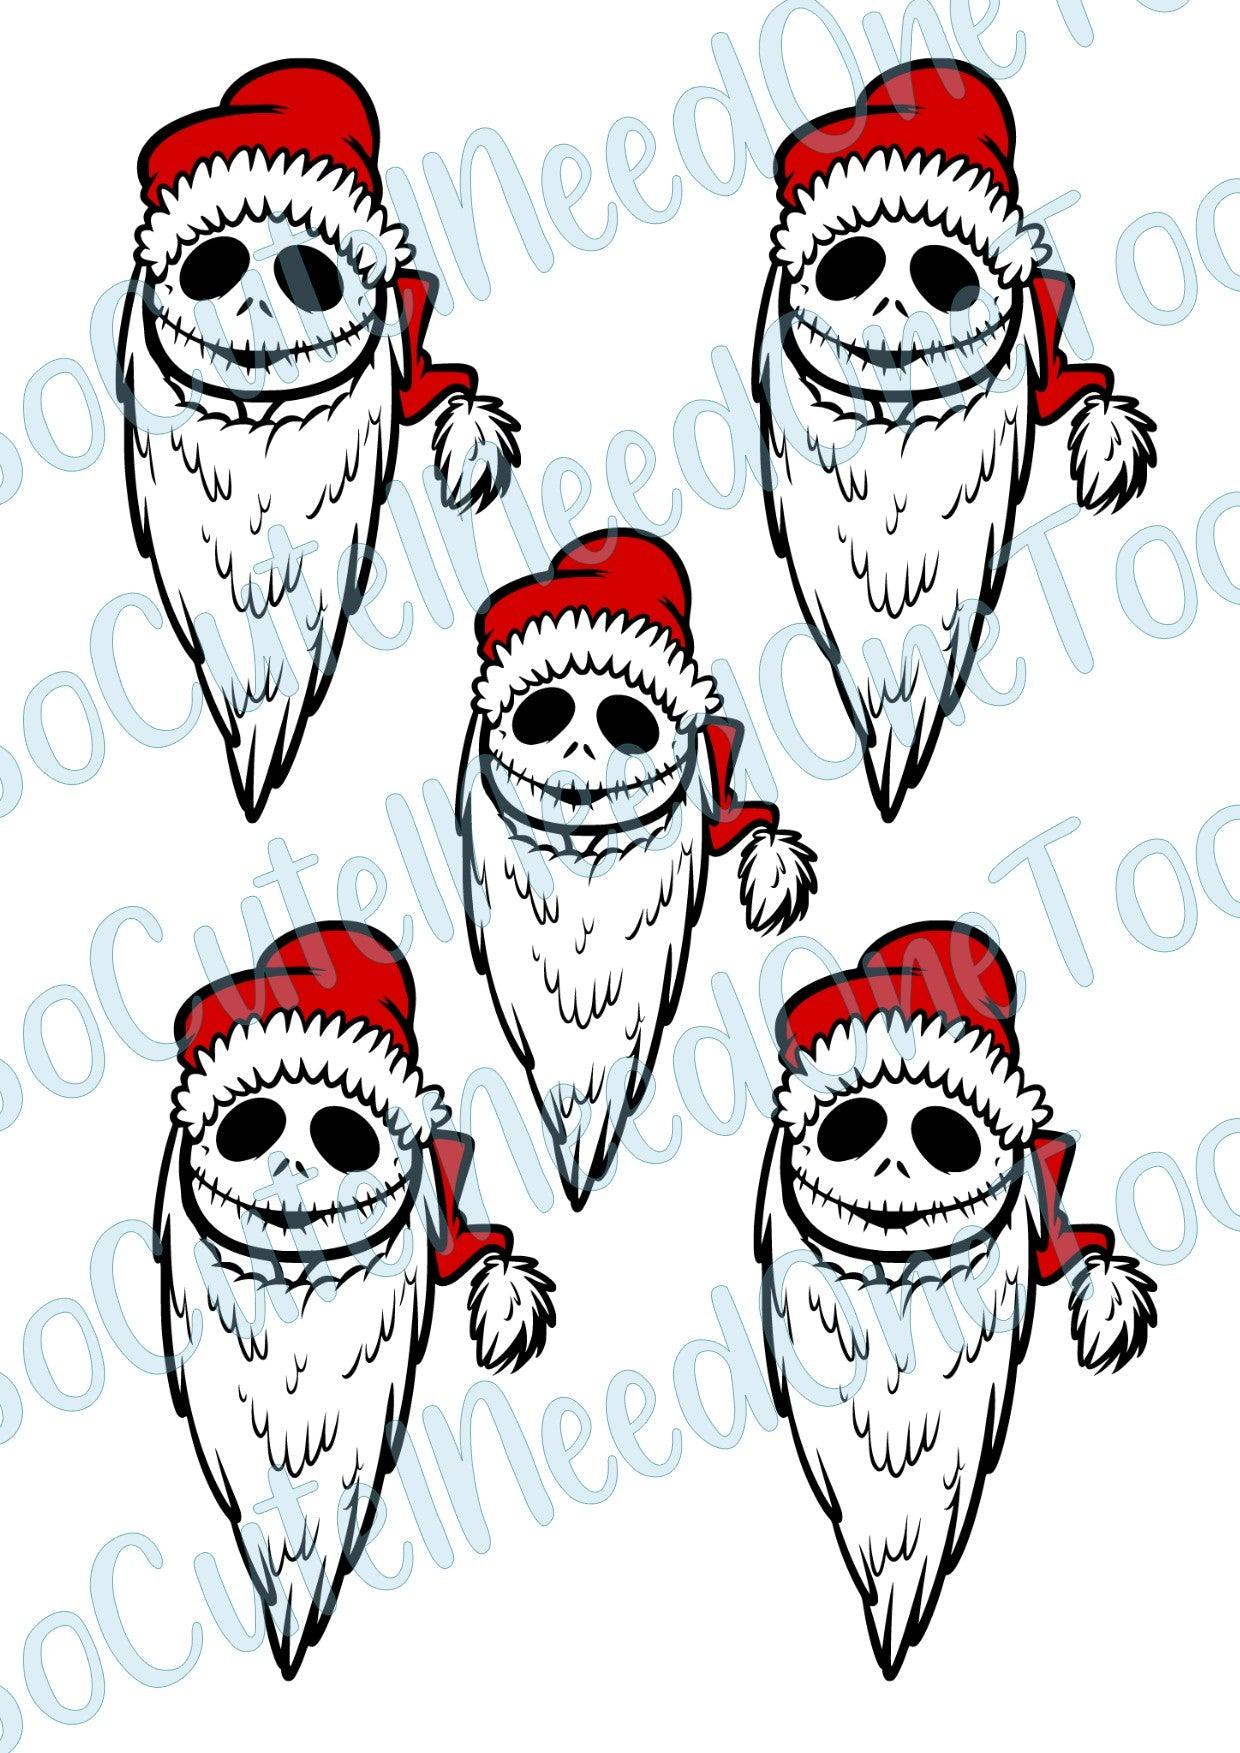 Jack Santa Clause On Clear/White Waterslide Paper - Ready To Use - SoCuteINeedOneToo